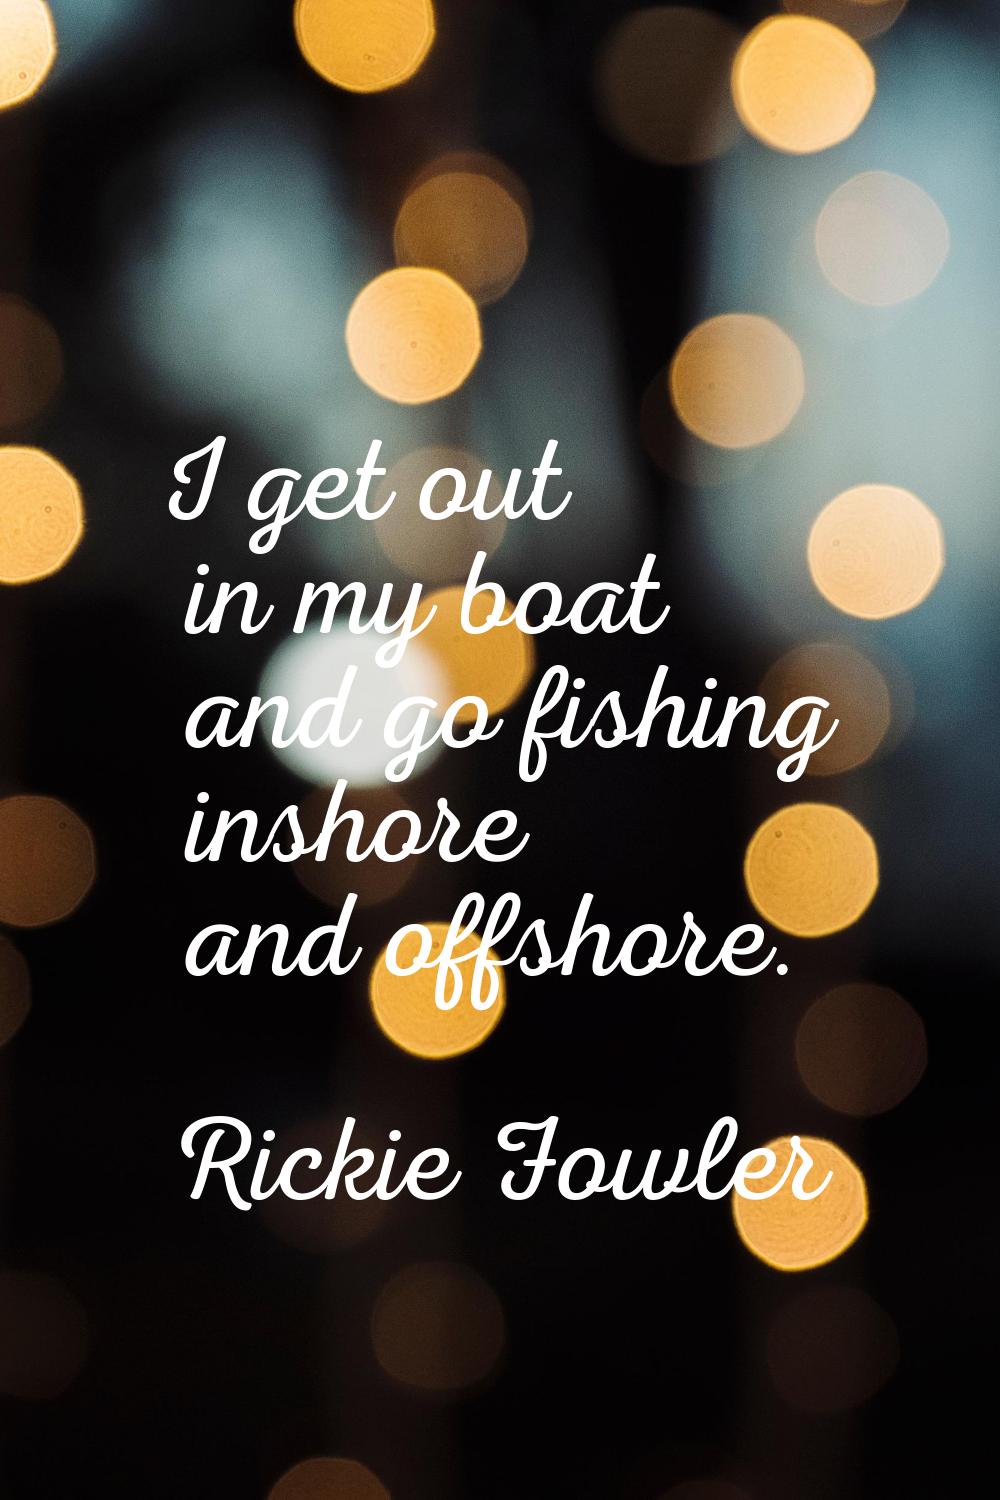 I get out in my boat and go fishing inshore and offshore.